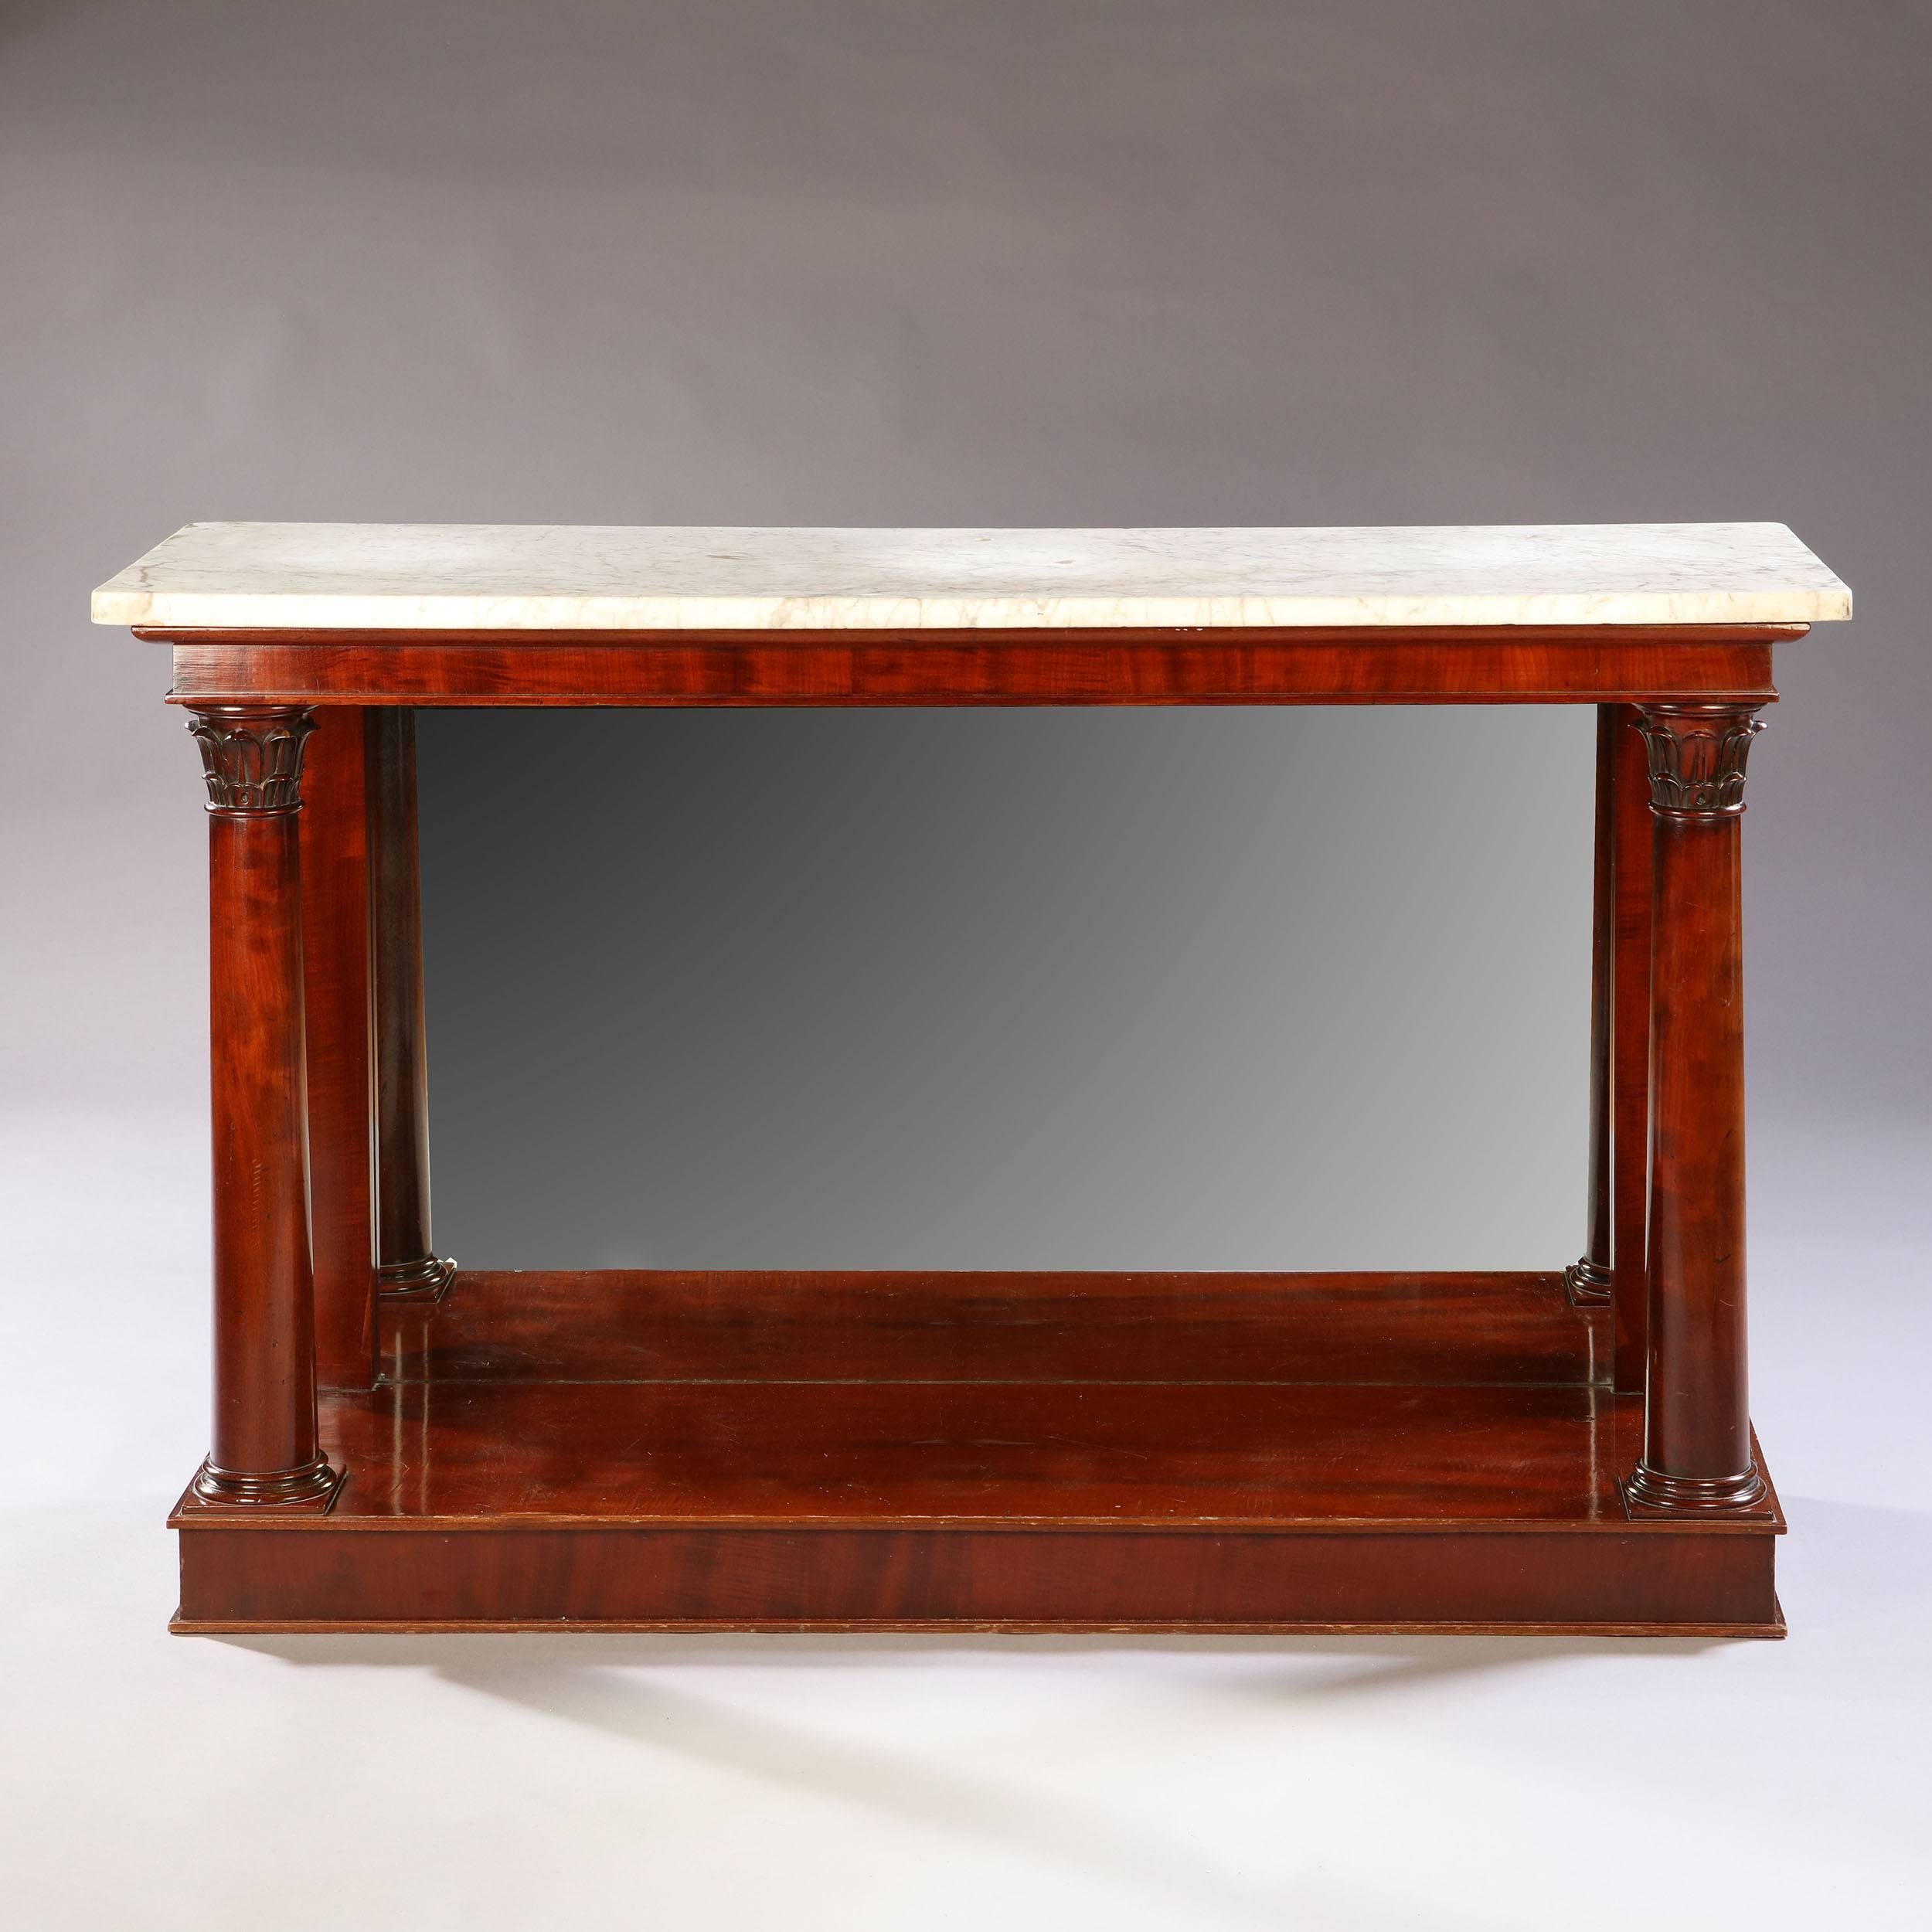 An early 19th century Empire period mahogany console table, with original marble top and a mirror plate to the back, with carved Corinthian capitals to the top of the uprights.